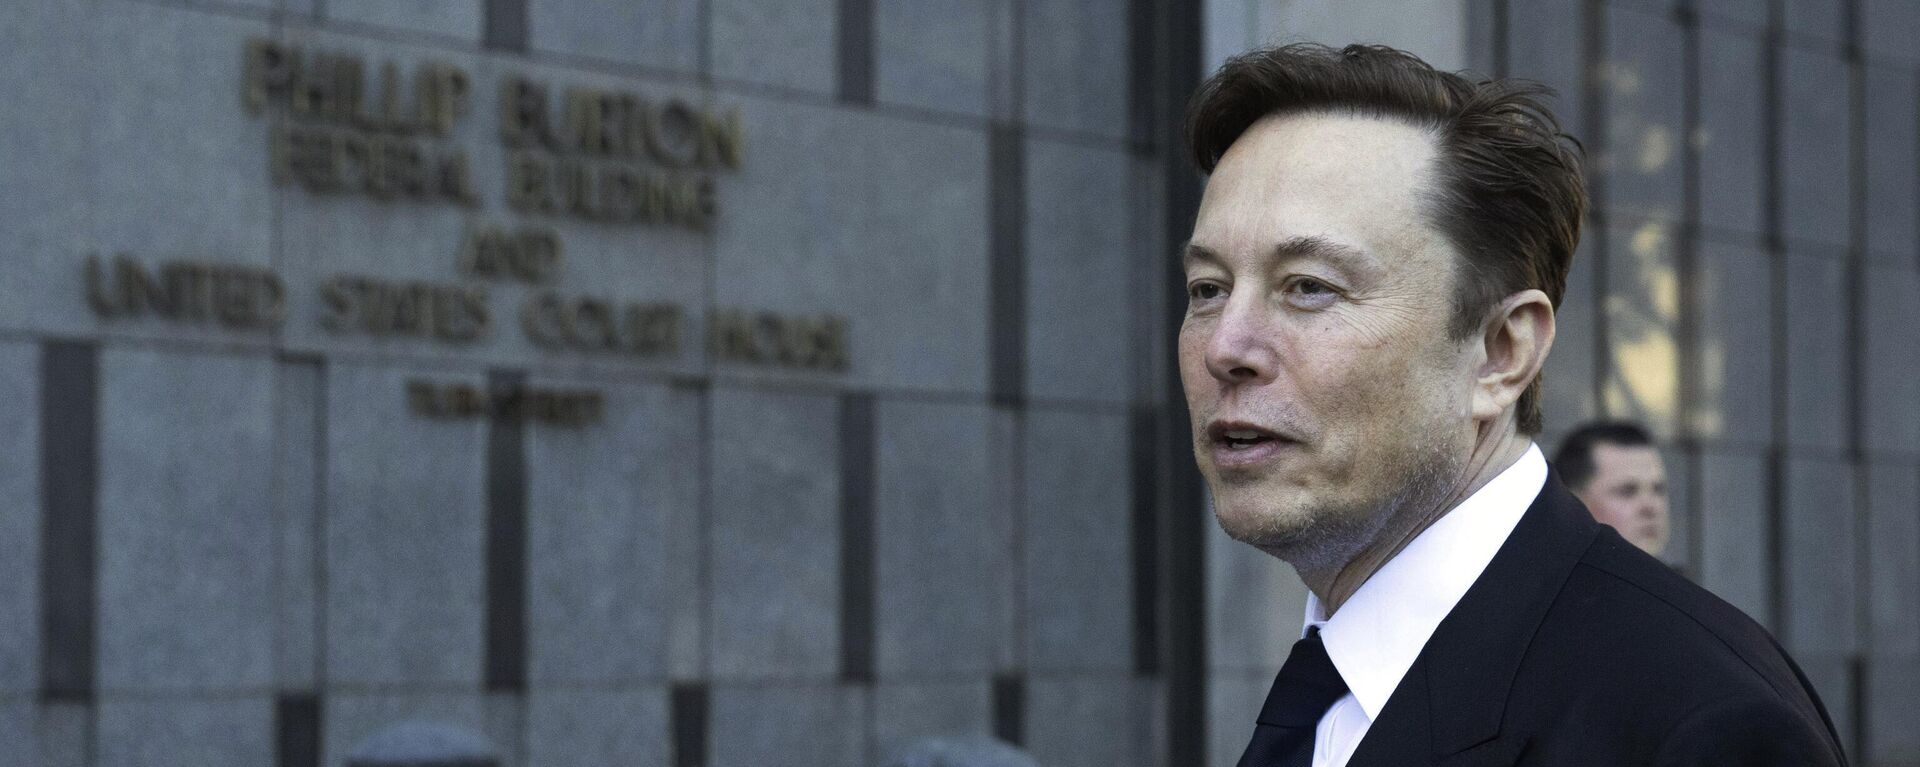 Elon Musk departs the Phillip Burton Federal Building and United States Court House in San Francisco, on Tuesday, Jan. 24, 2023. - Sputnik International, 1920, 18.11.2023